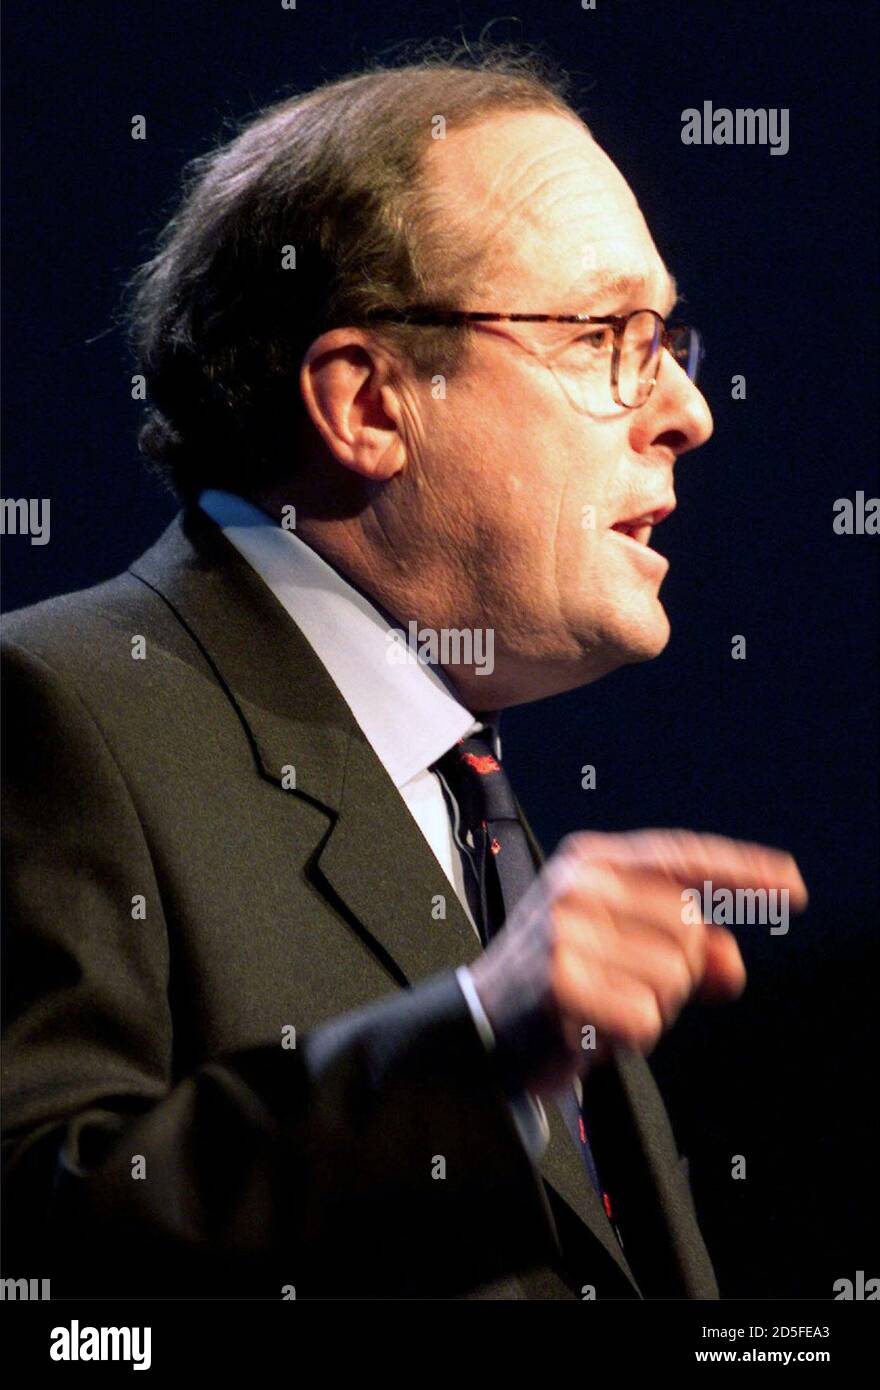 Chairman elect of the Conservative Party Michael Ancram gestures during his speech at the Party conference in Bournemouth October 8. Ancram said he was against proportional representation and warned the government not to change the electoral system.  DJM/AA Stock Photo